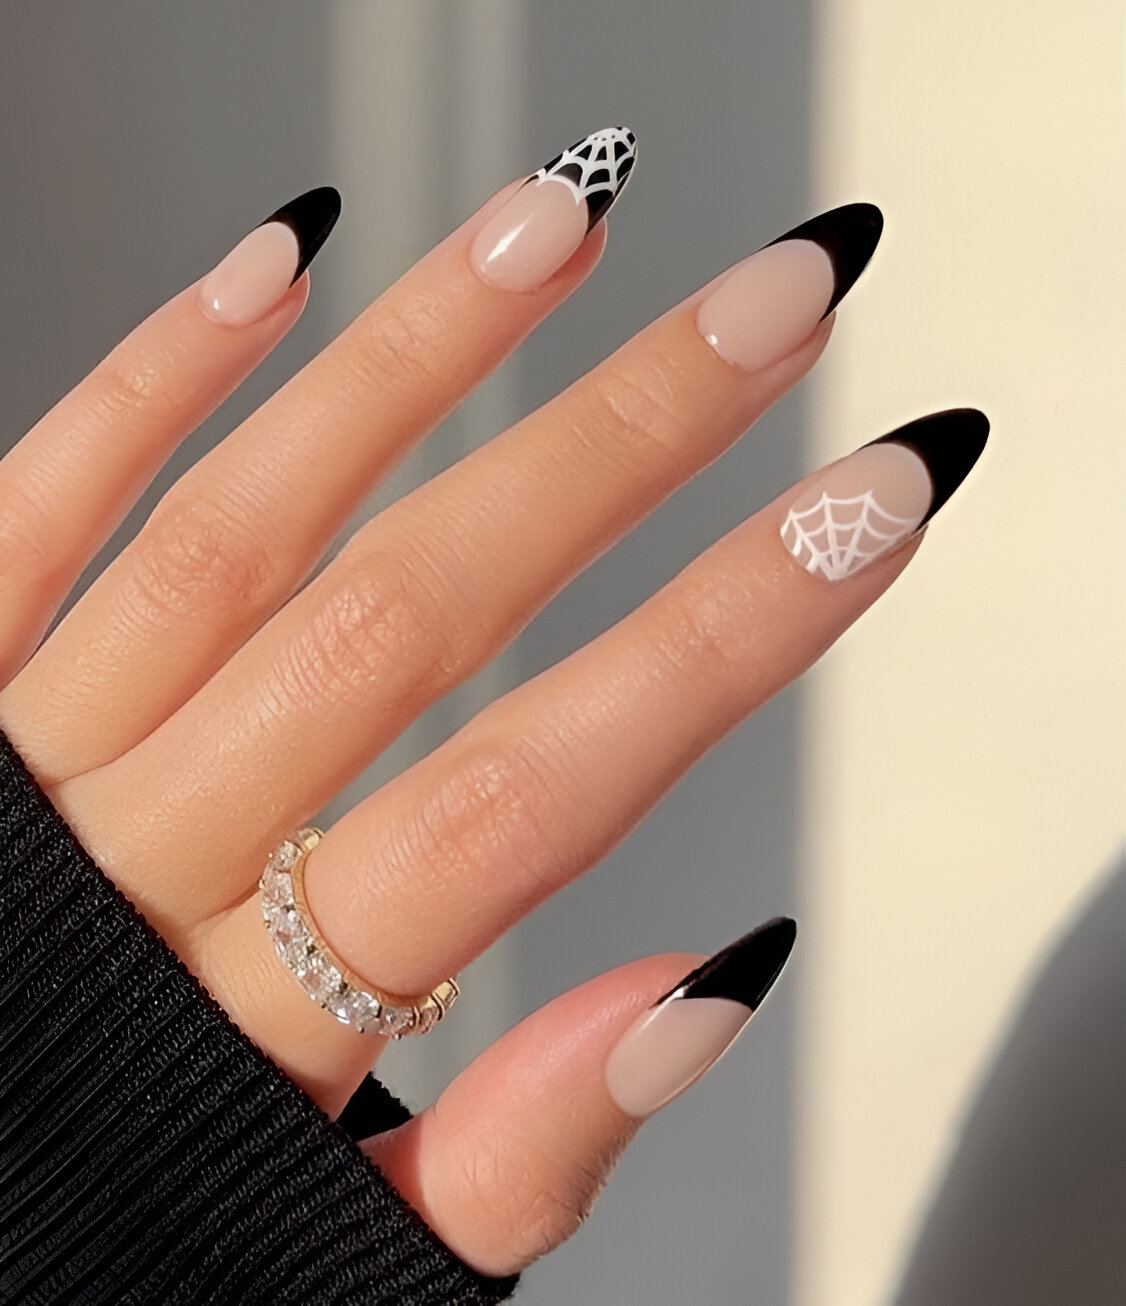 Simple French Tips With A Spooky Twist